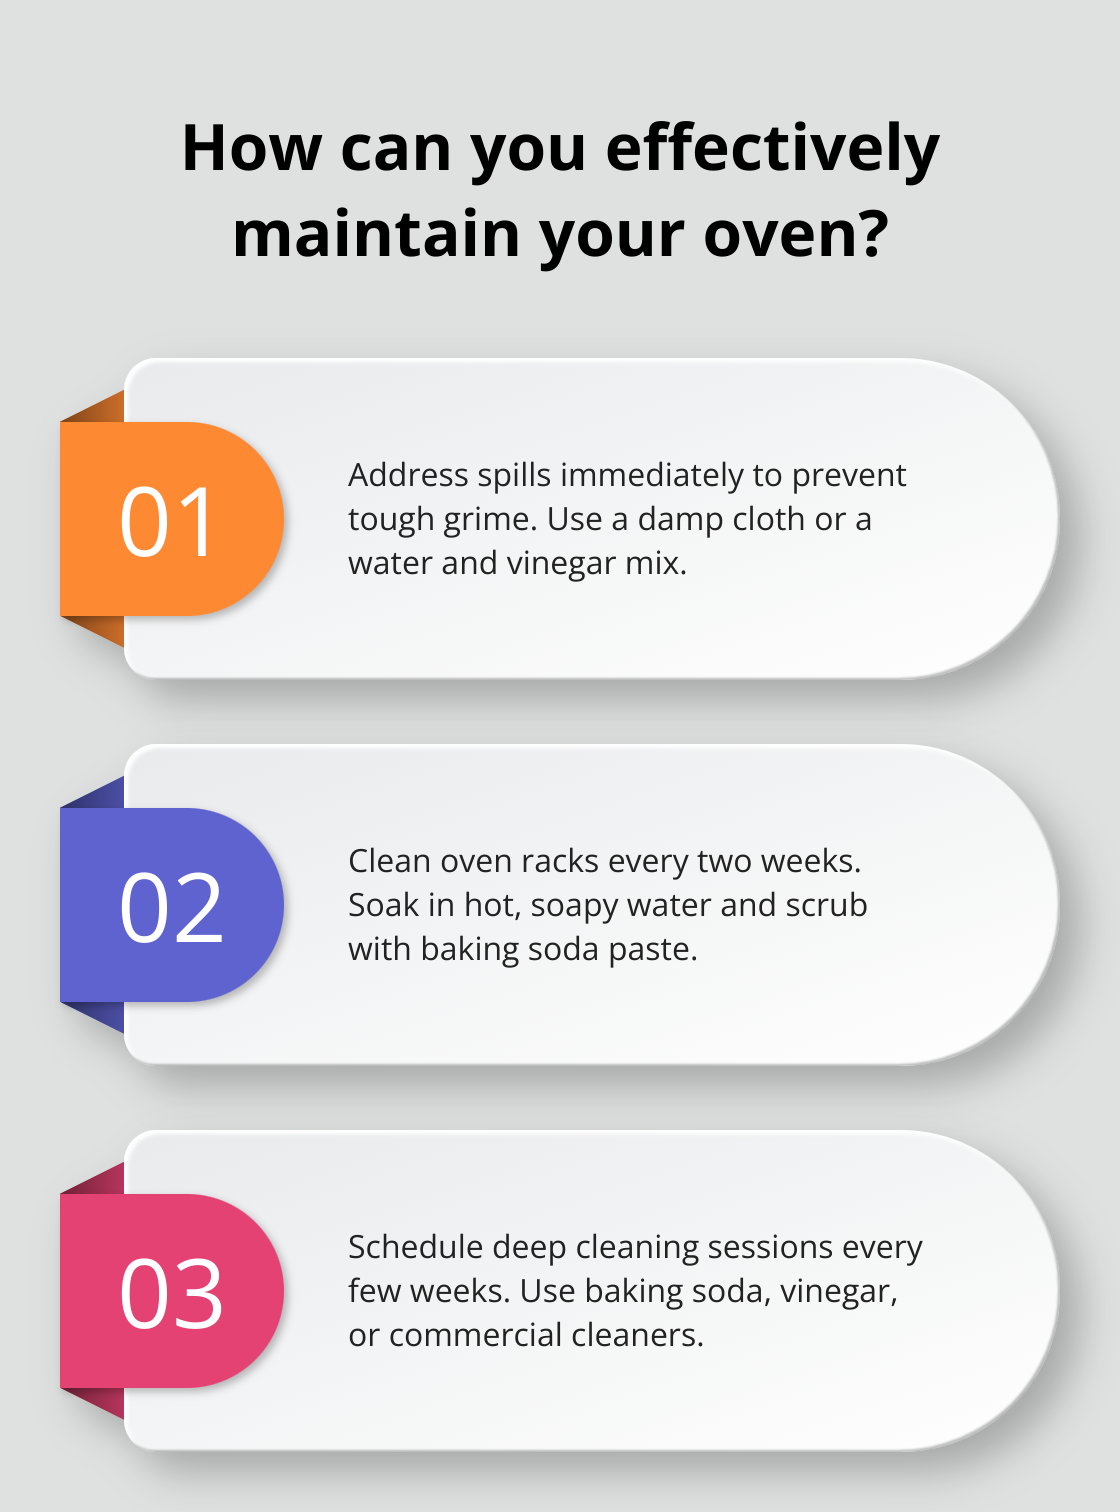 Fact - How can you effectively maintain your oven?